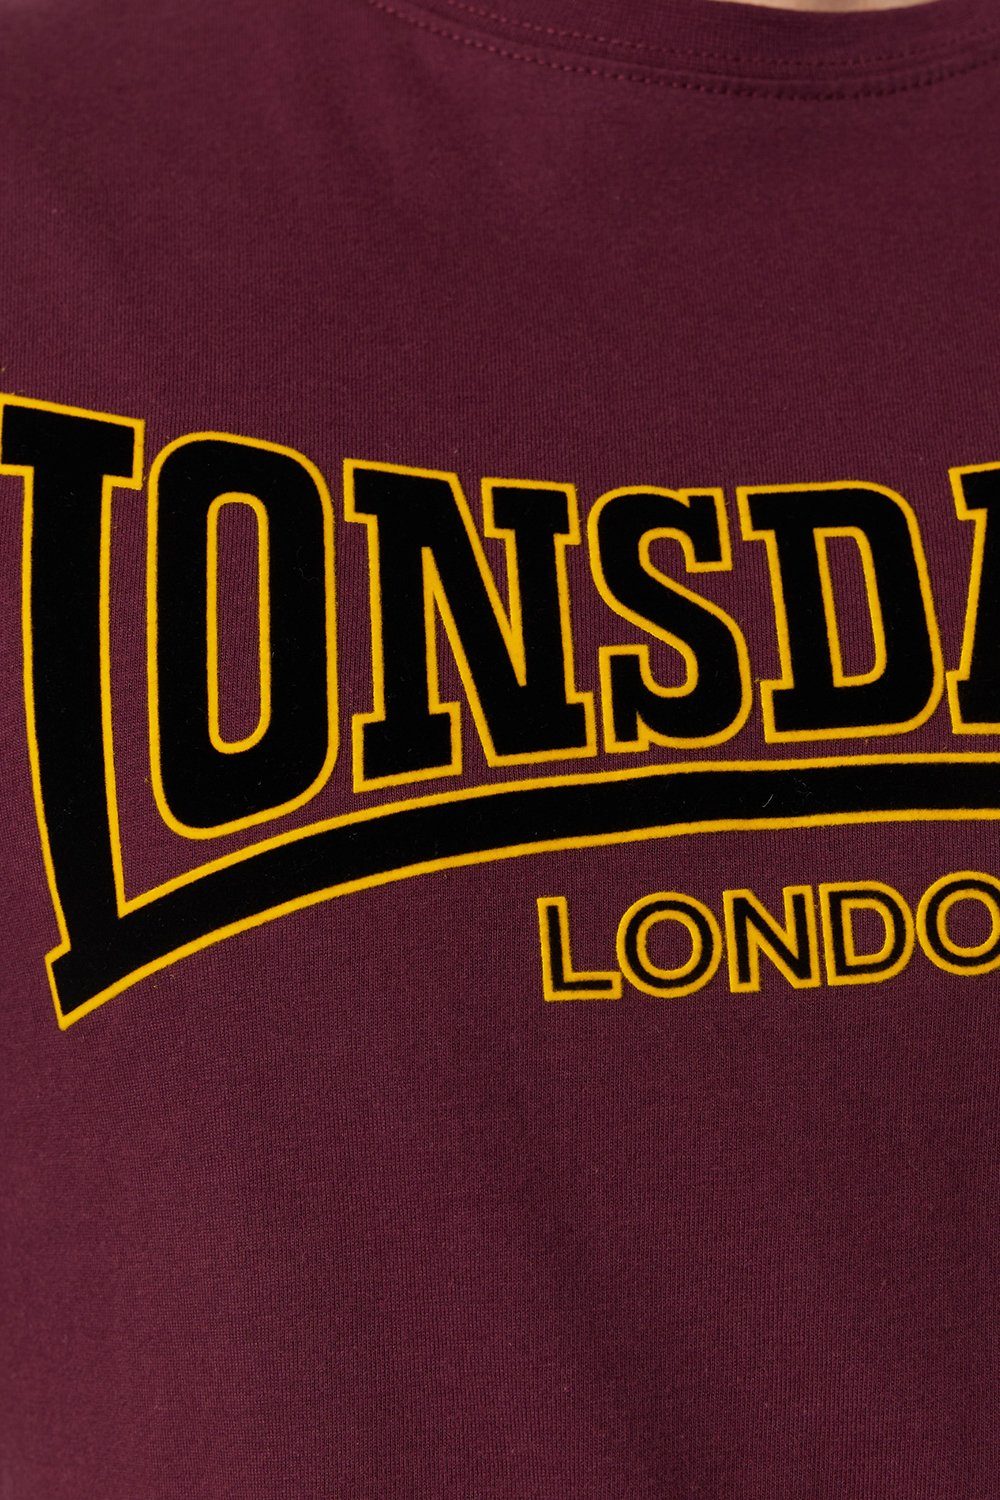 T-Shirt Oxblood Lonsdale CLASSIC